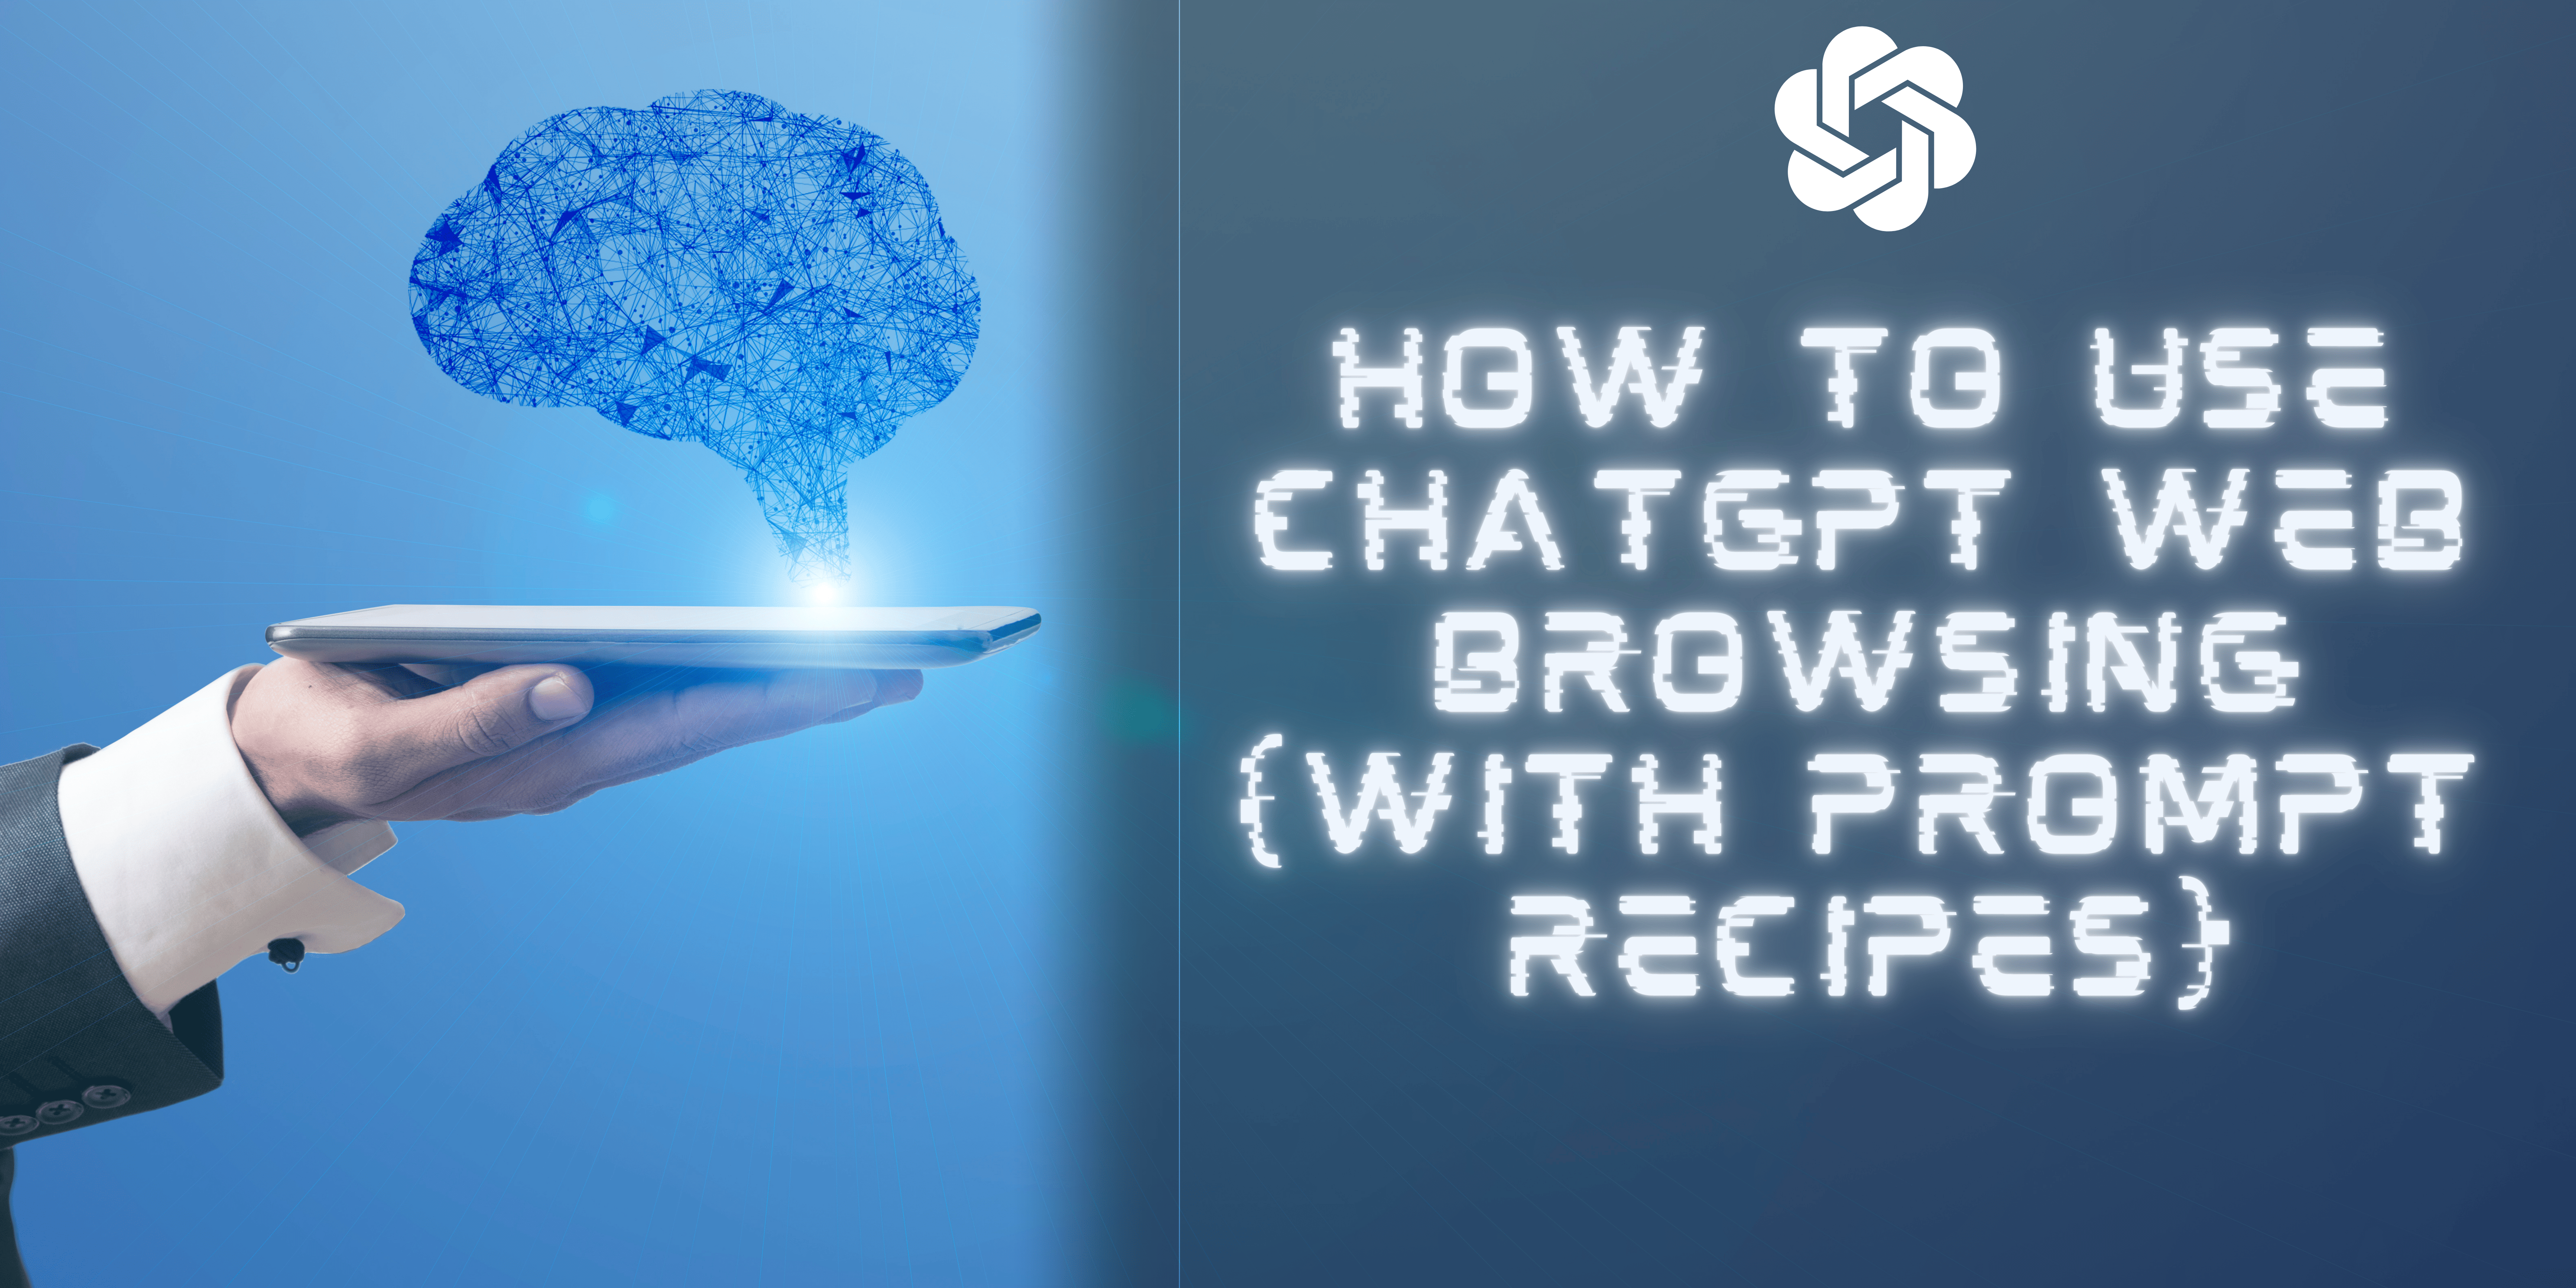 How to Use ChatGPT Web Browsing (With Prompt Recipes)